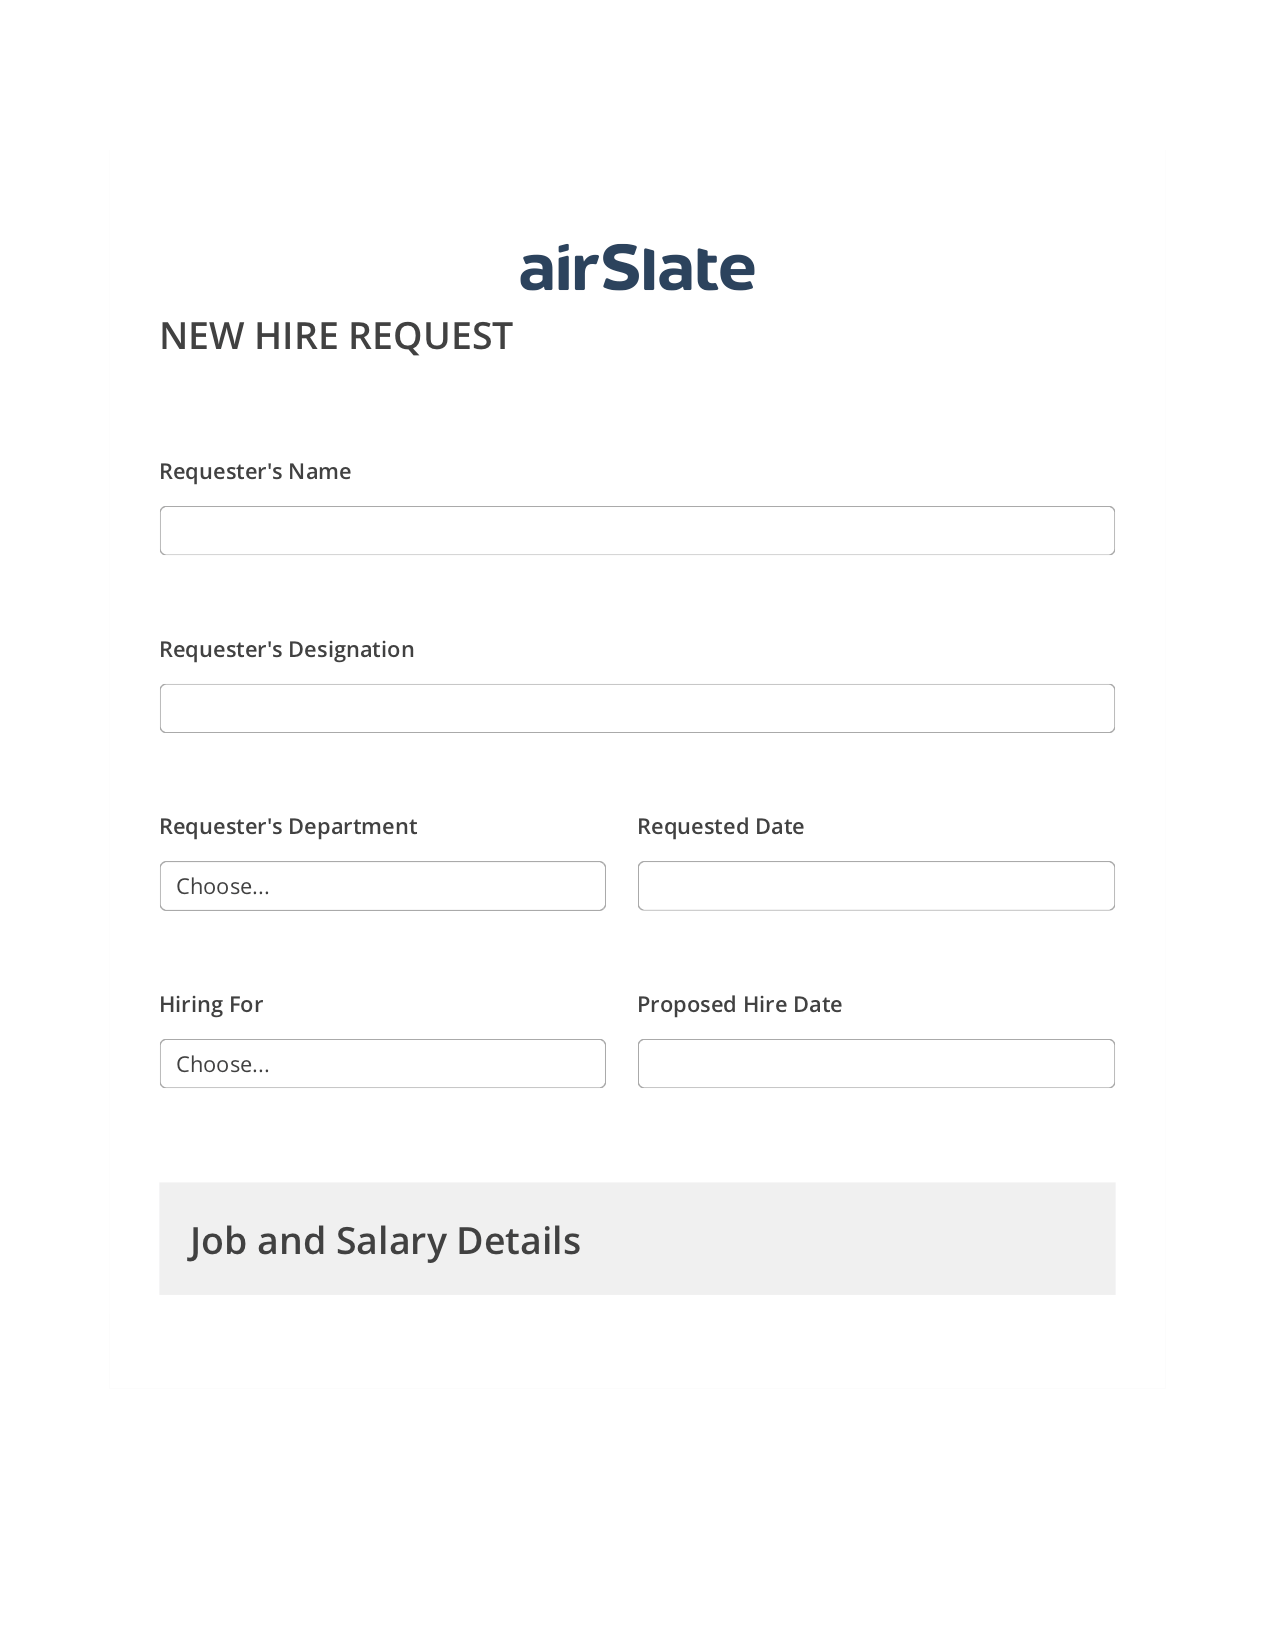 Multirole Hiring Request Workflow Pre-fill from AirTable Bot, System Bot - Create a Slate in another Flow, Archive to SharePoint Folder Bot